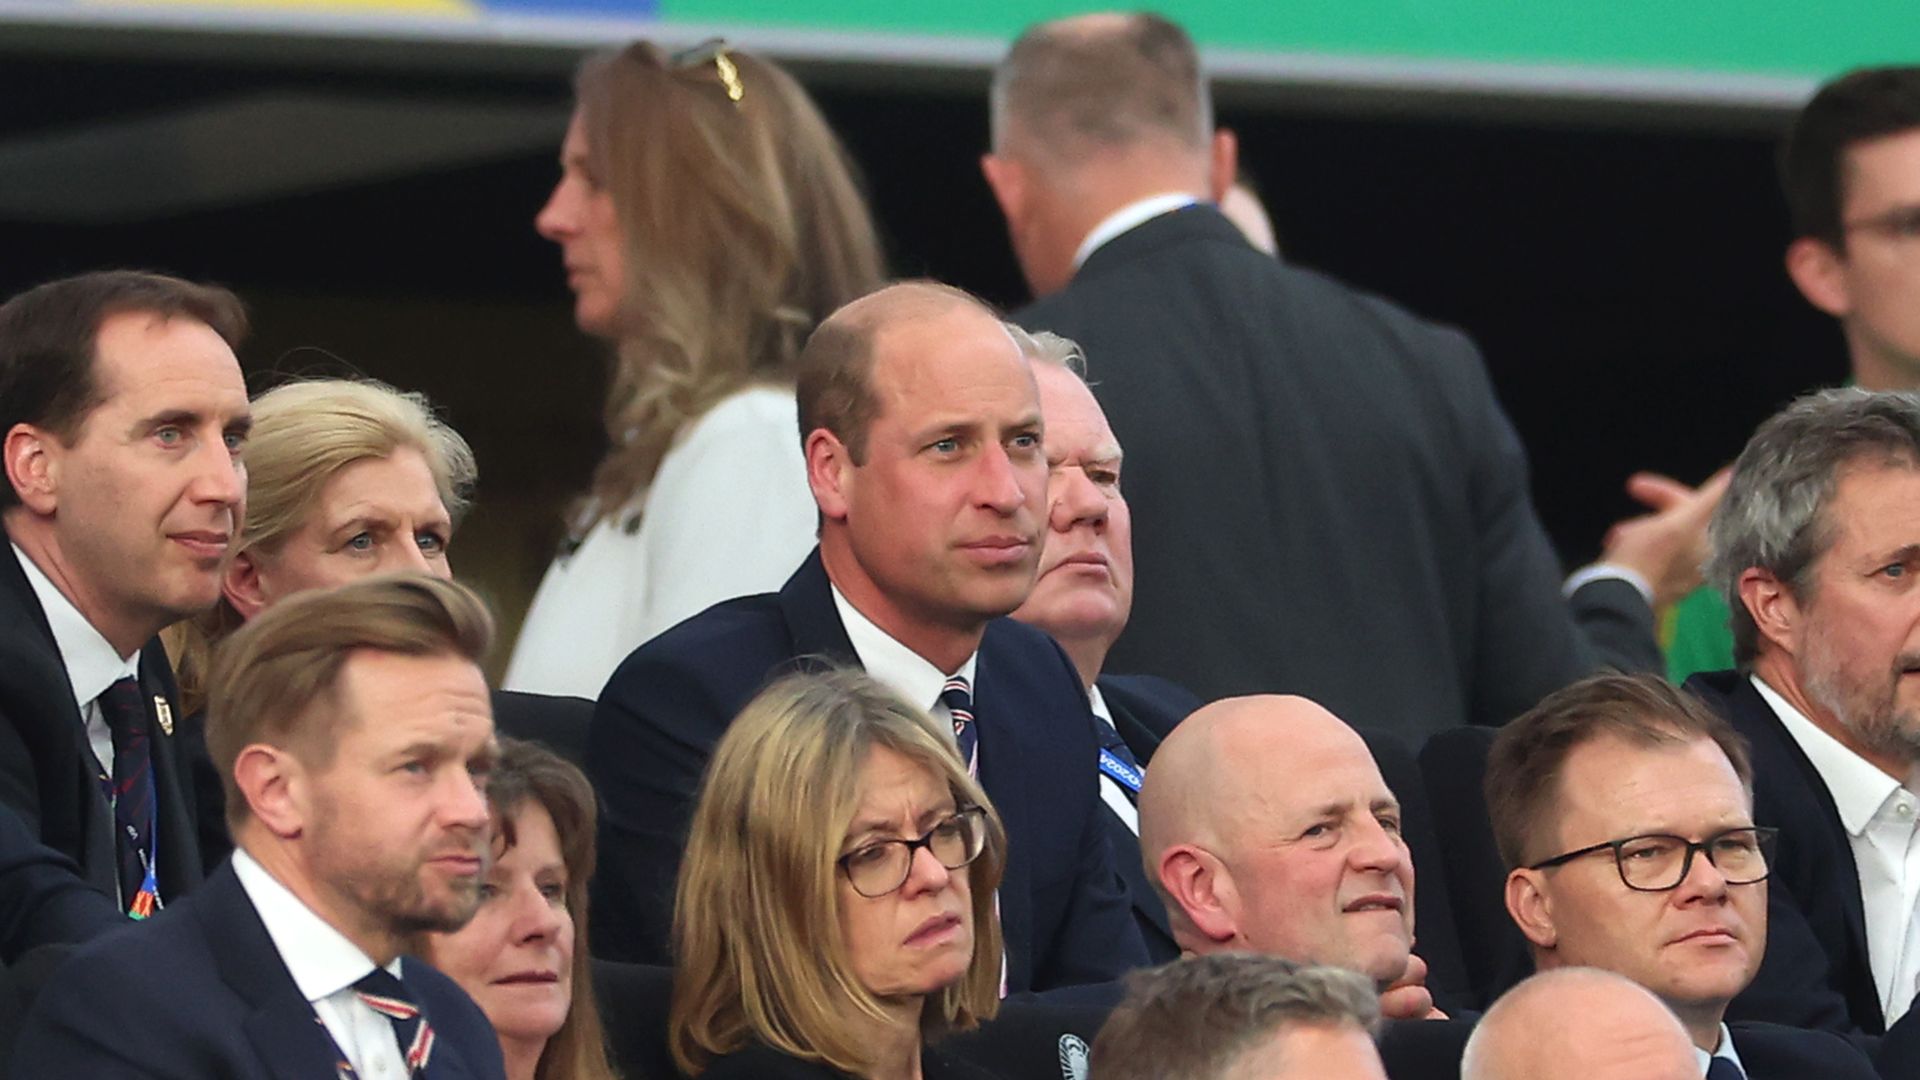 Prince William looking downbeat